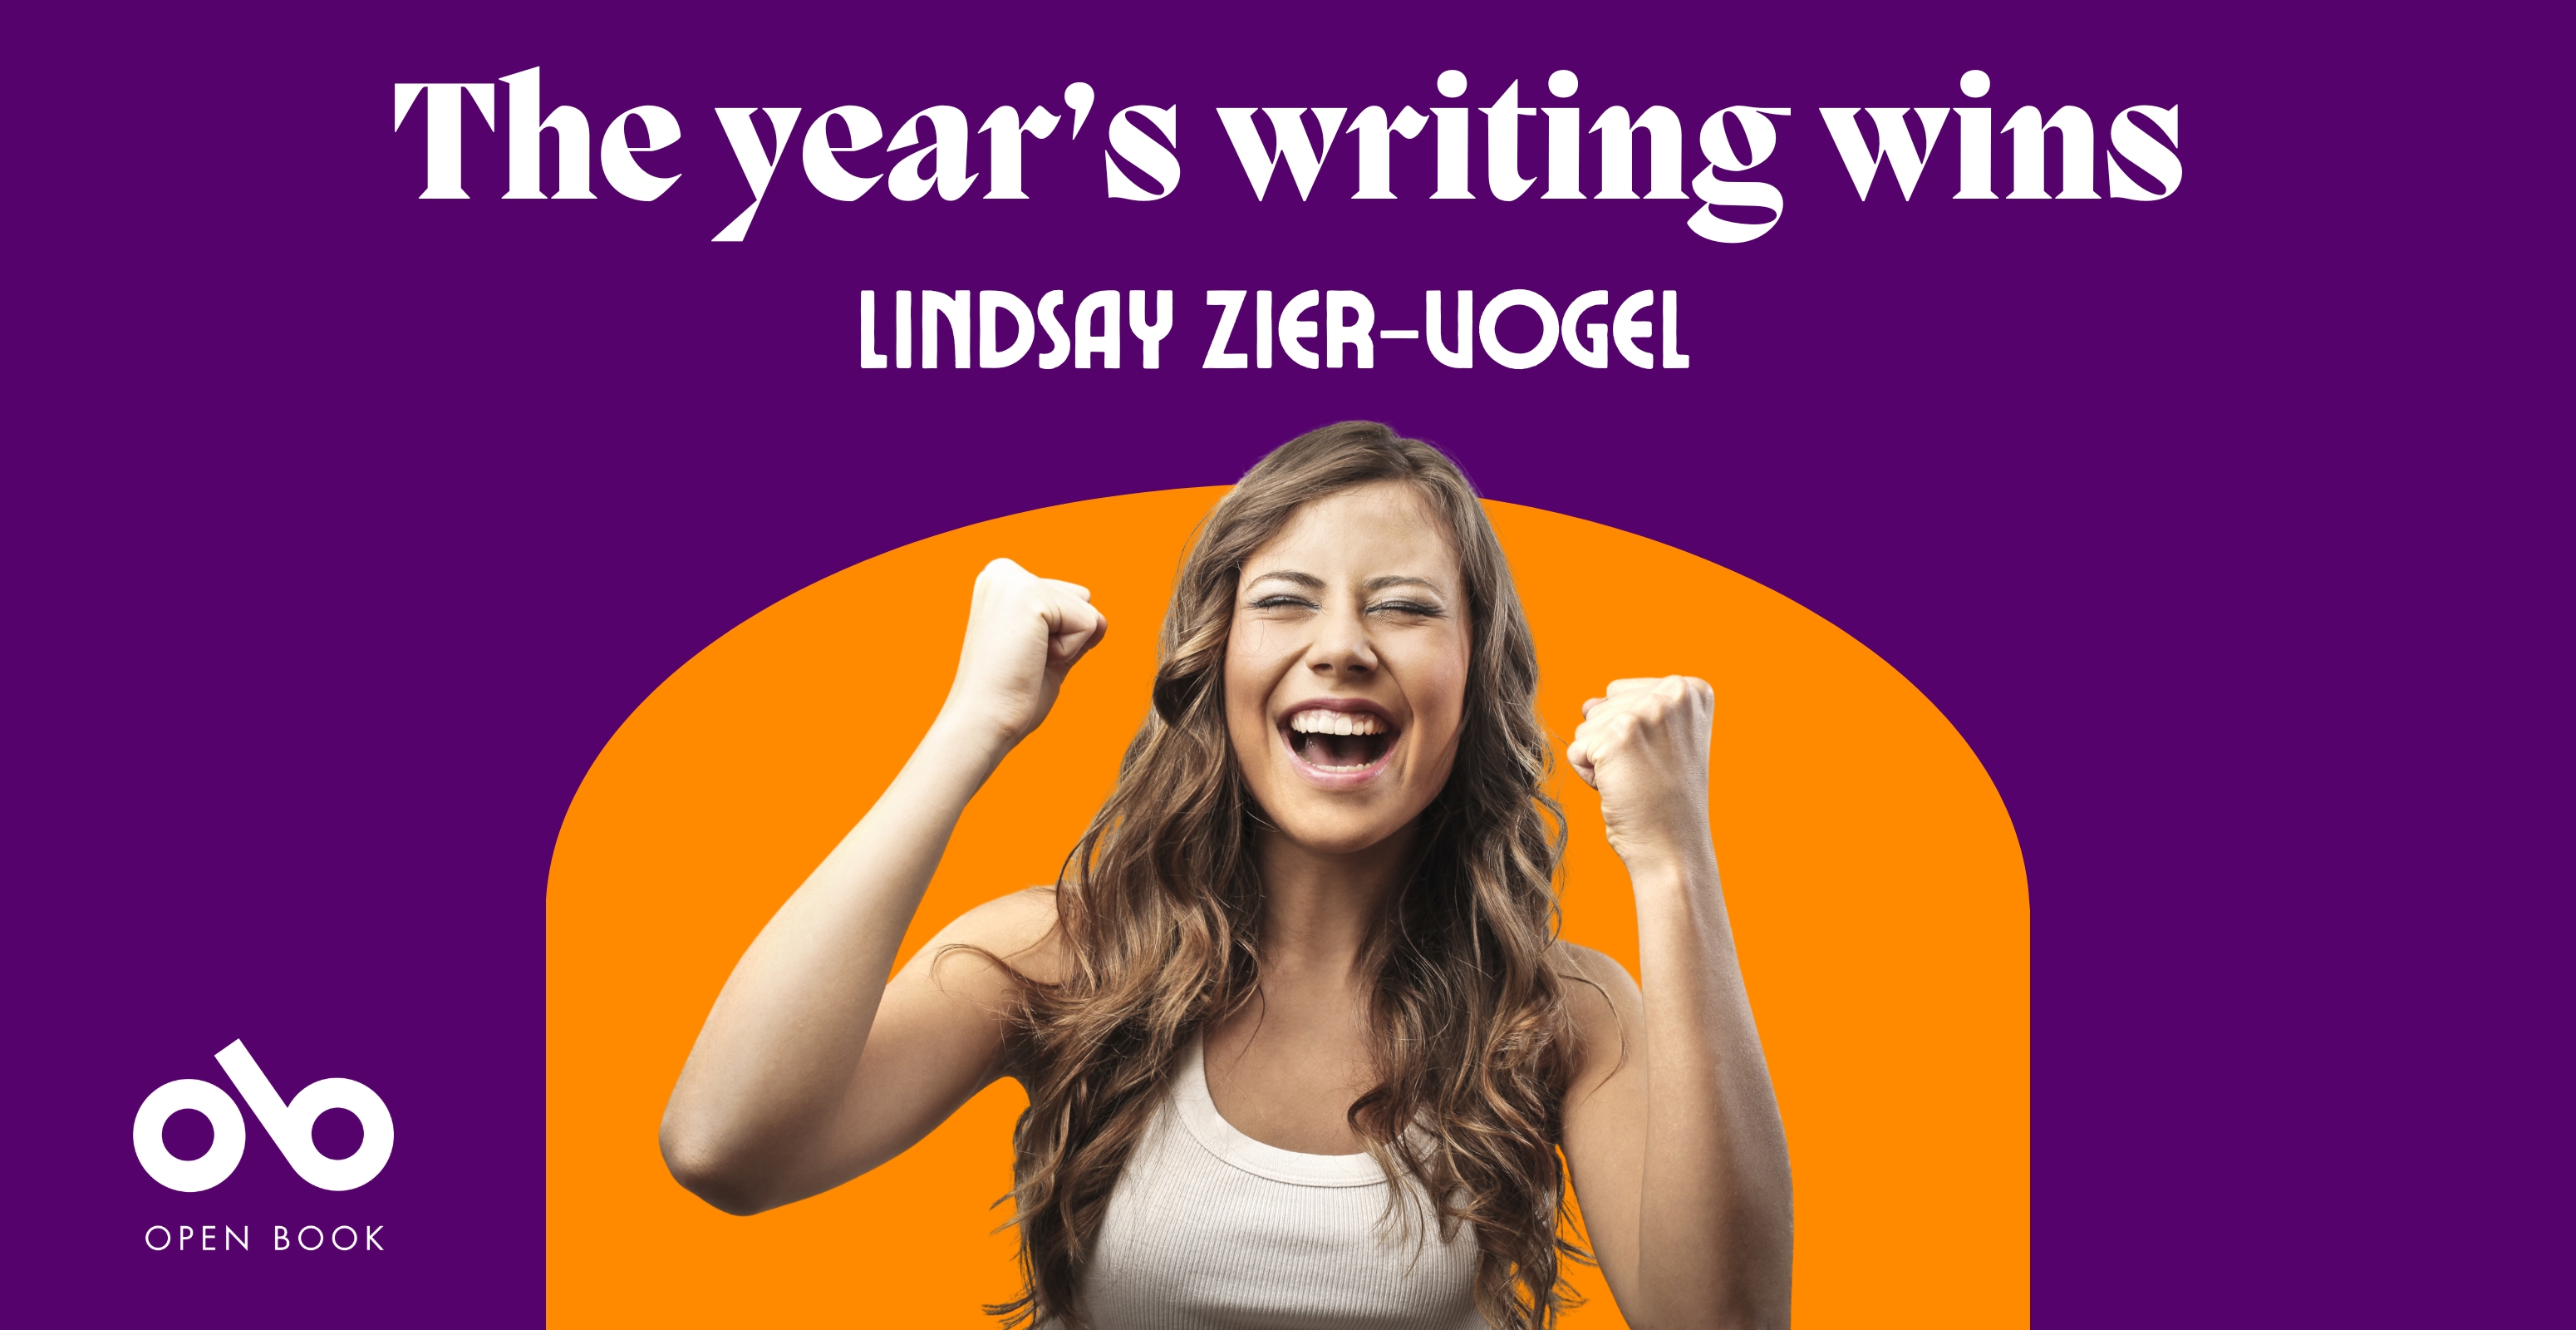 The year’s writing wins (4000 × 4000 px)